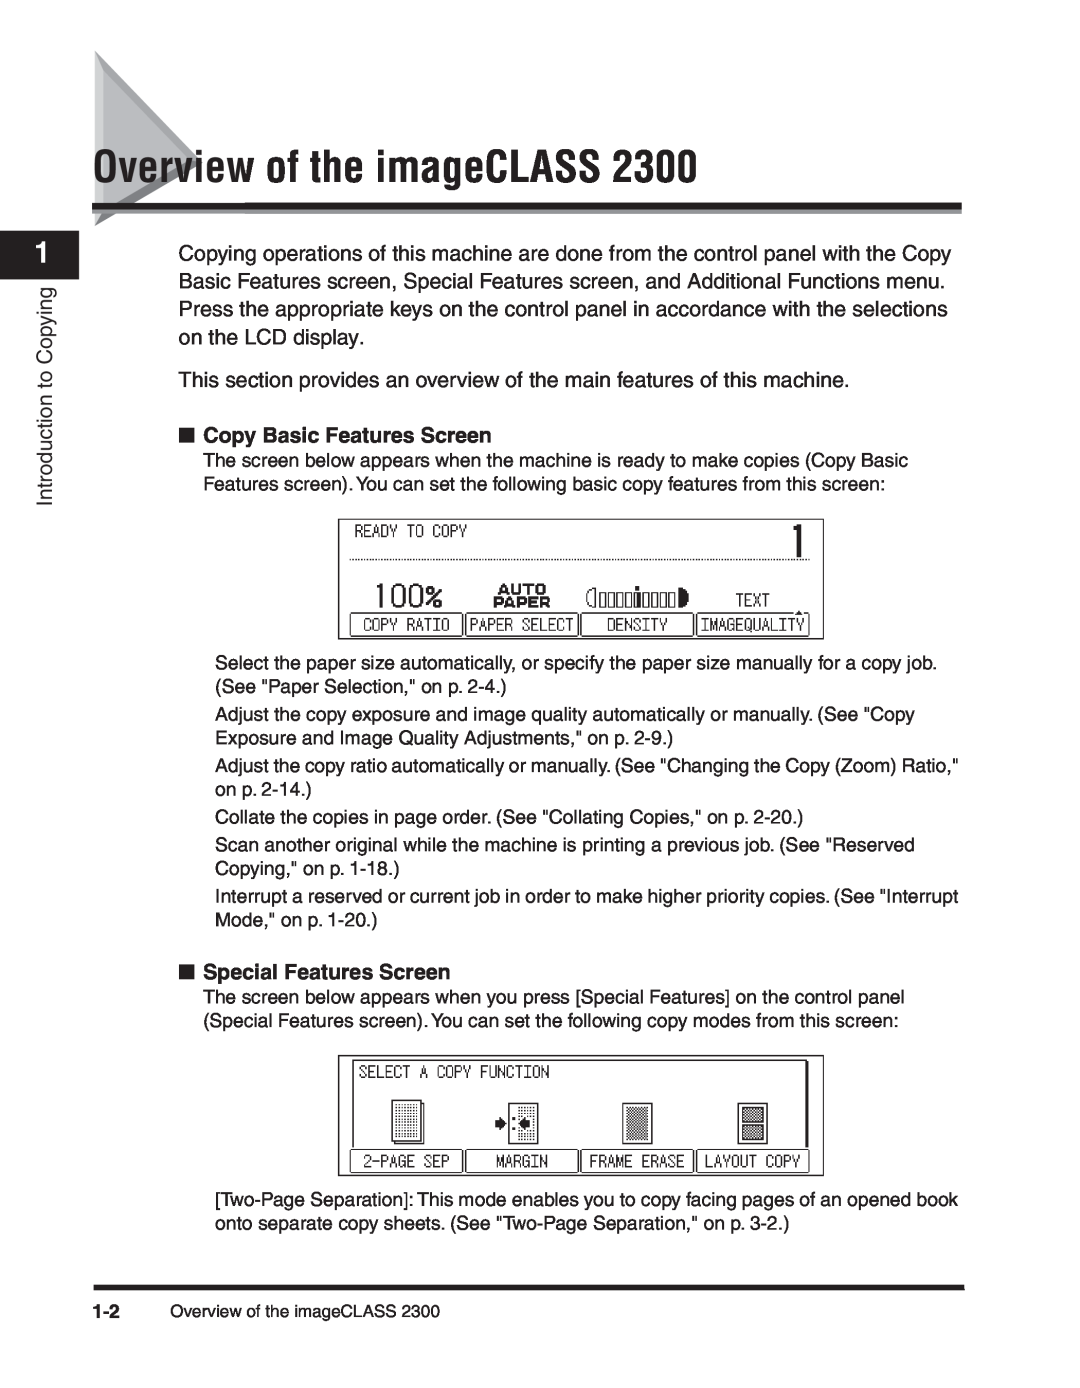 Canon 2300 manual Overview of the imageCLASS, Introduction to Copying, Copy Basic Features Screen, Special Features Screen 